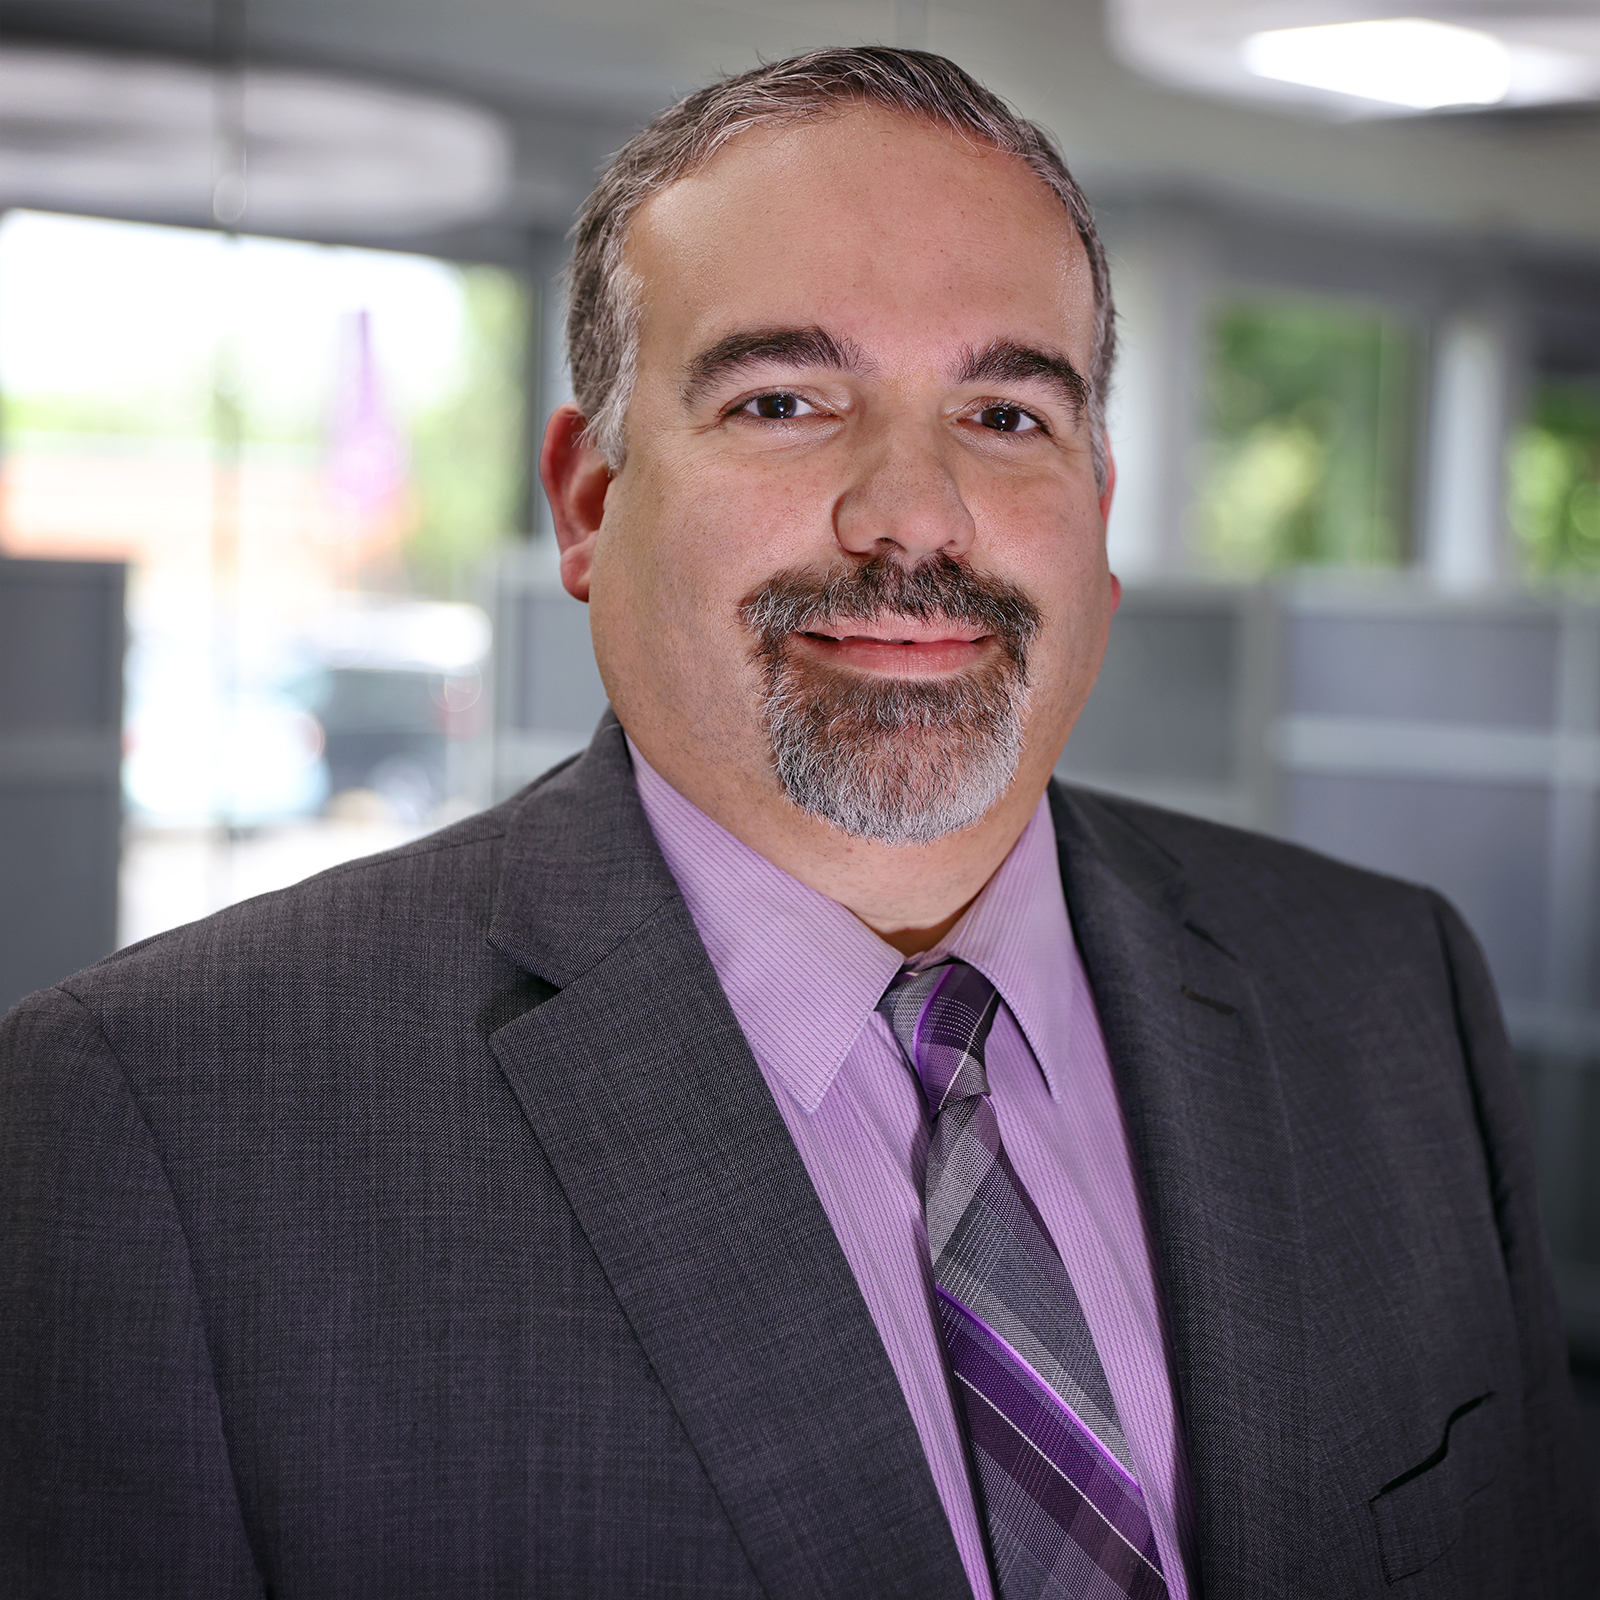 Vice President of Enrollment Management and Marketing, Raul Galarza| Excelsior University